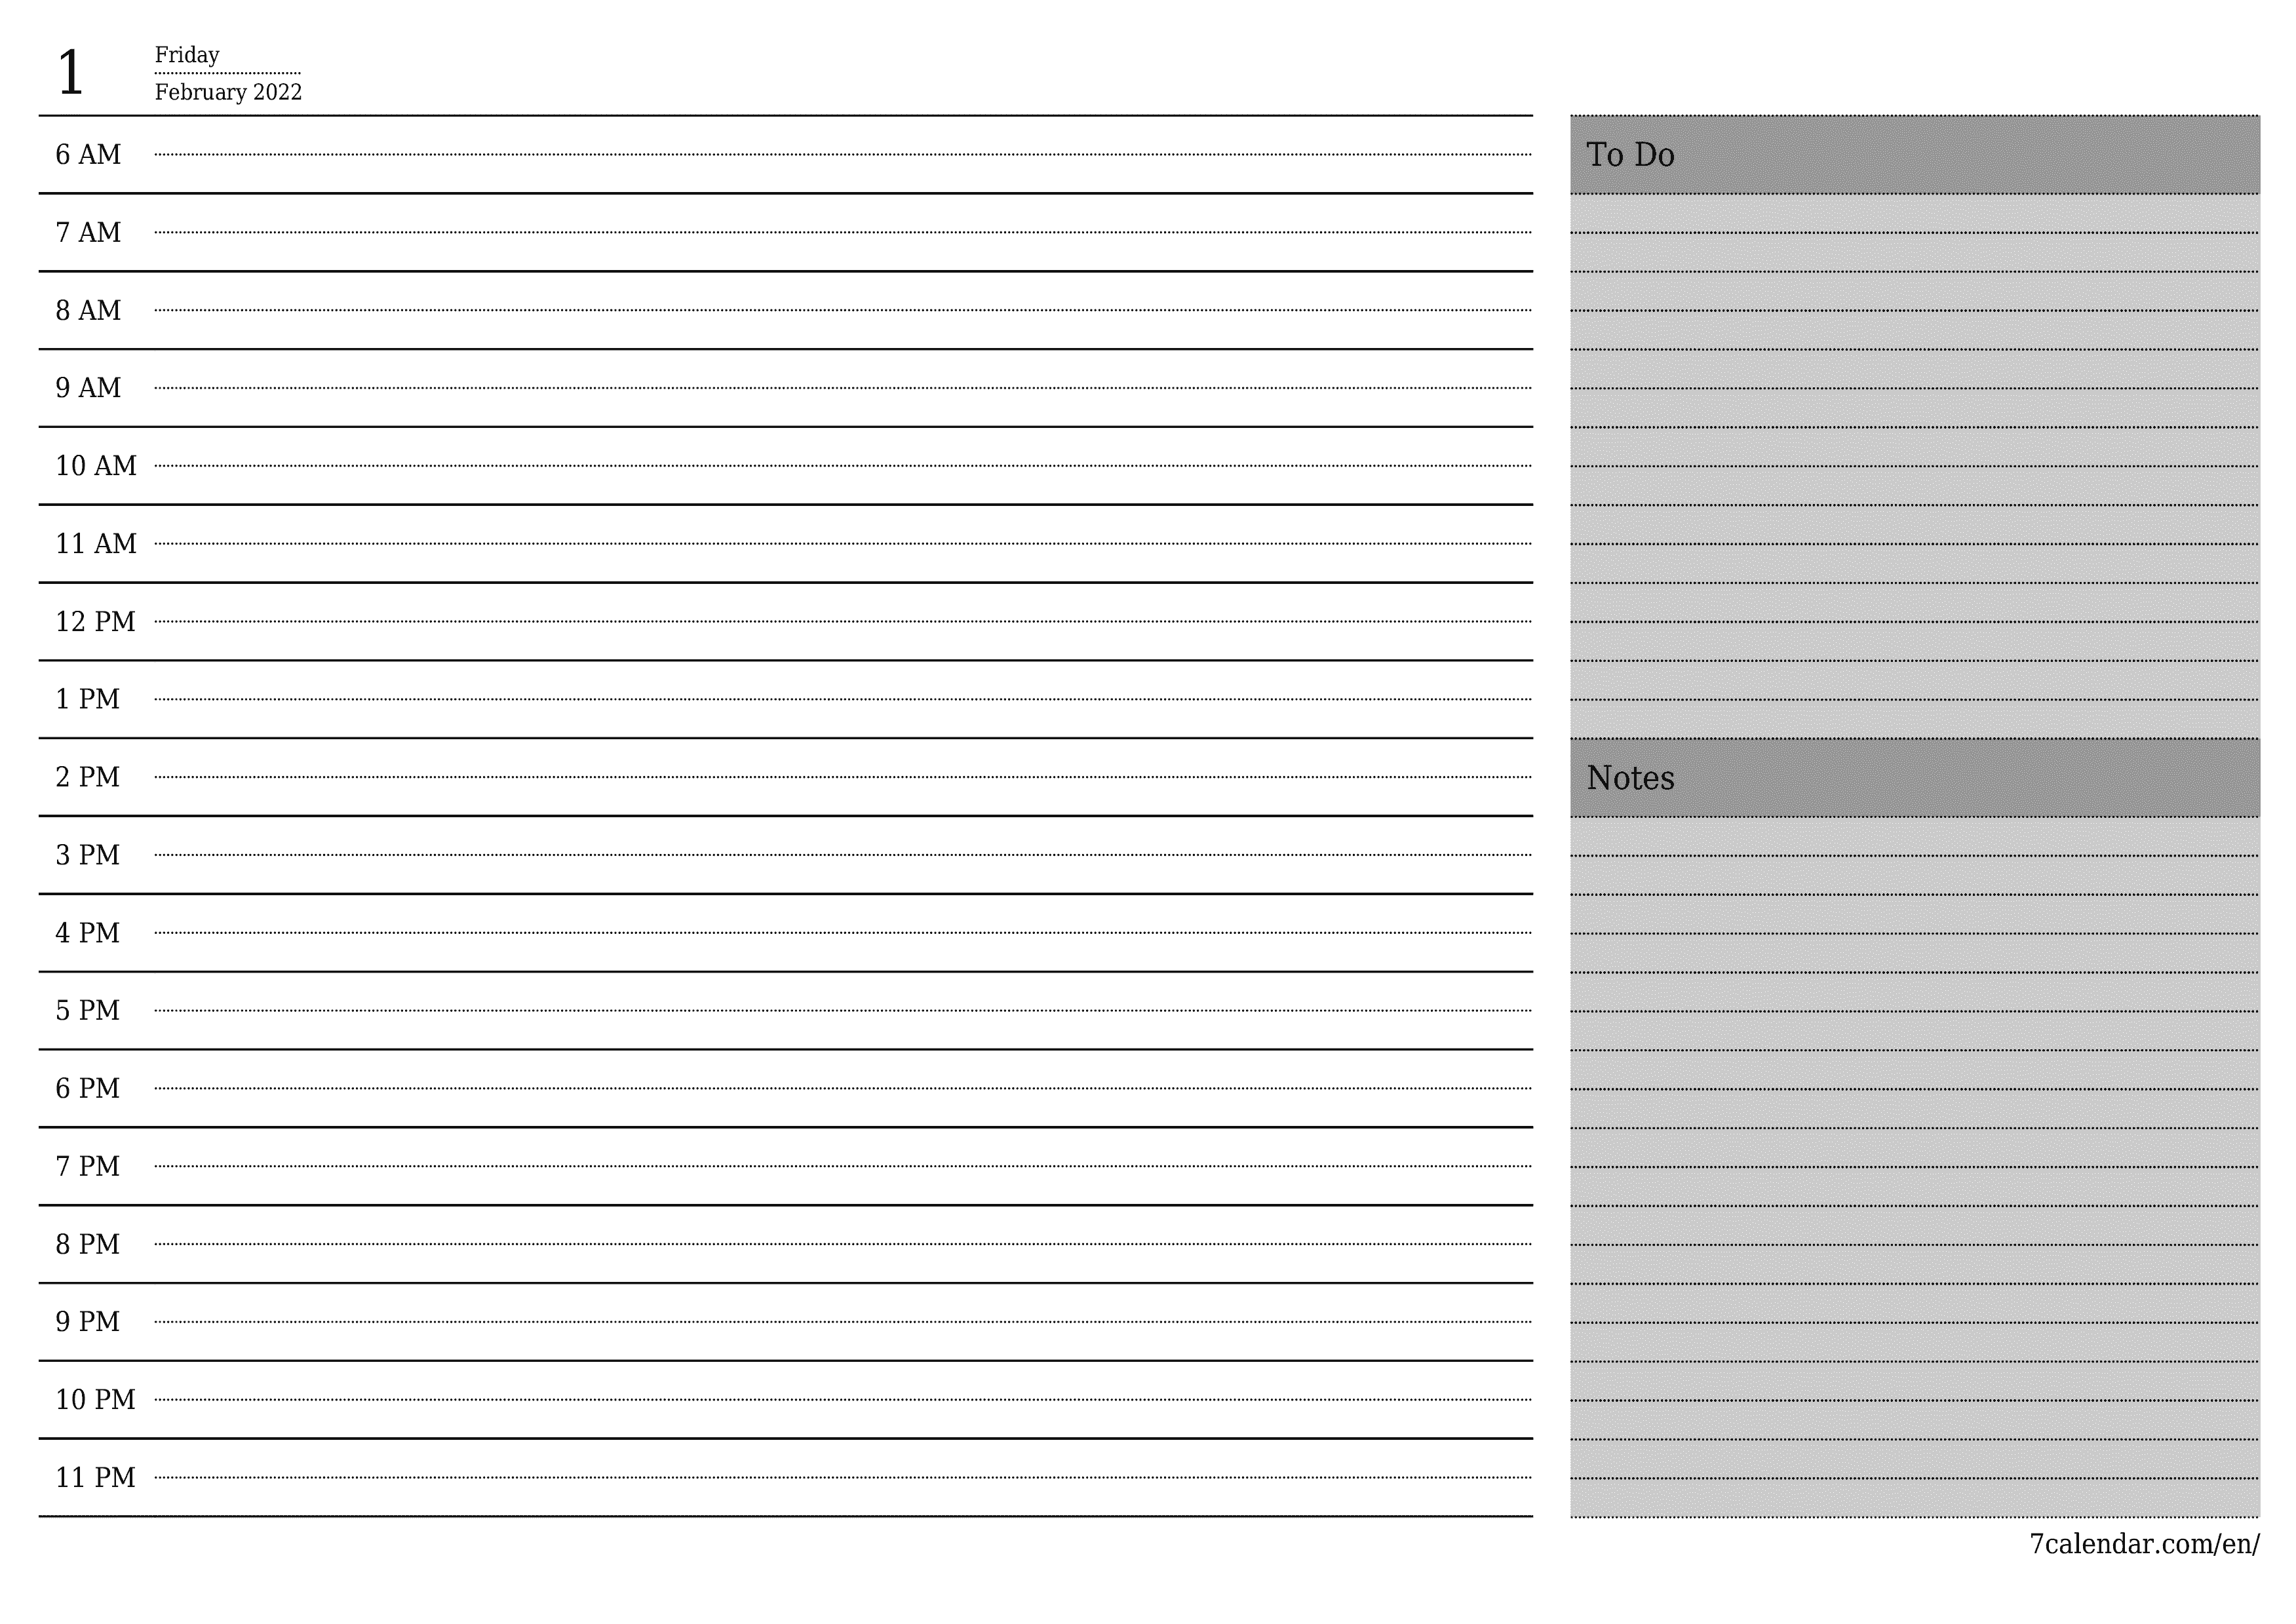 Blank daily calendar planner for day February 2022 with notes, save and print to PDF PNG English - 7calendar.com